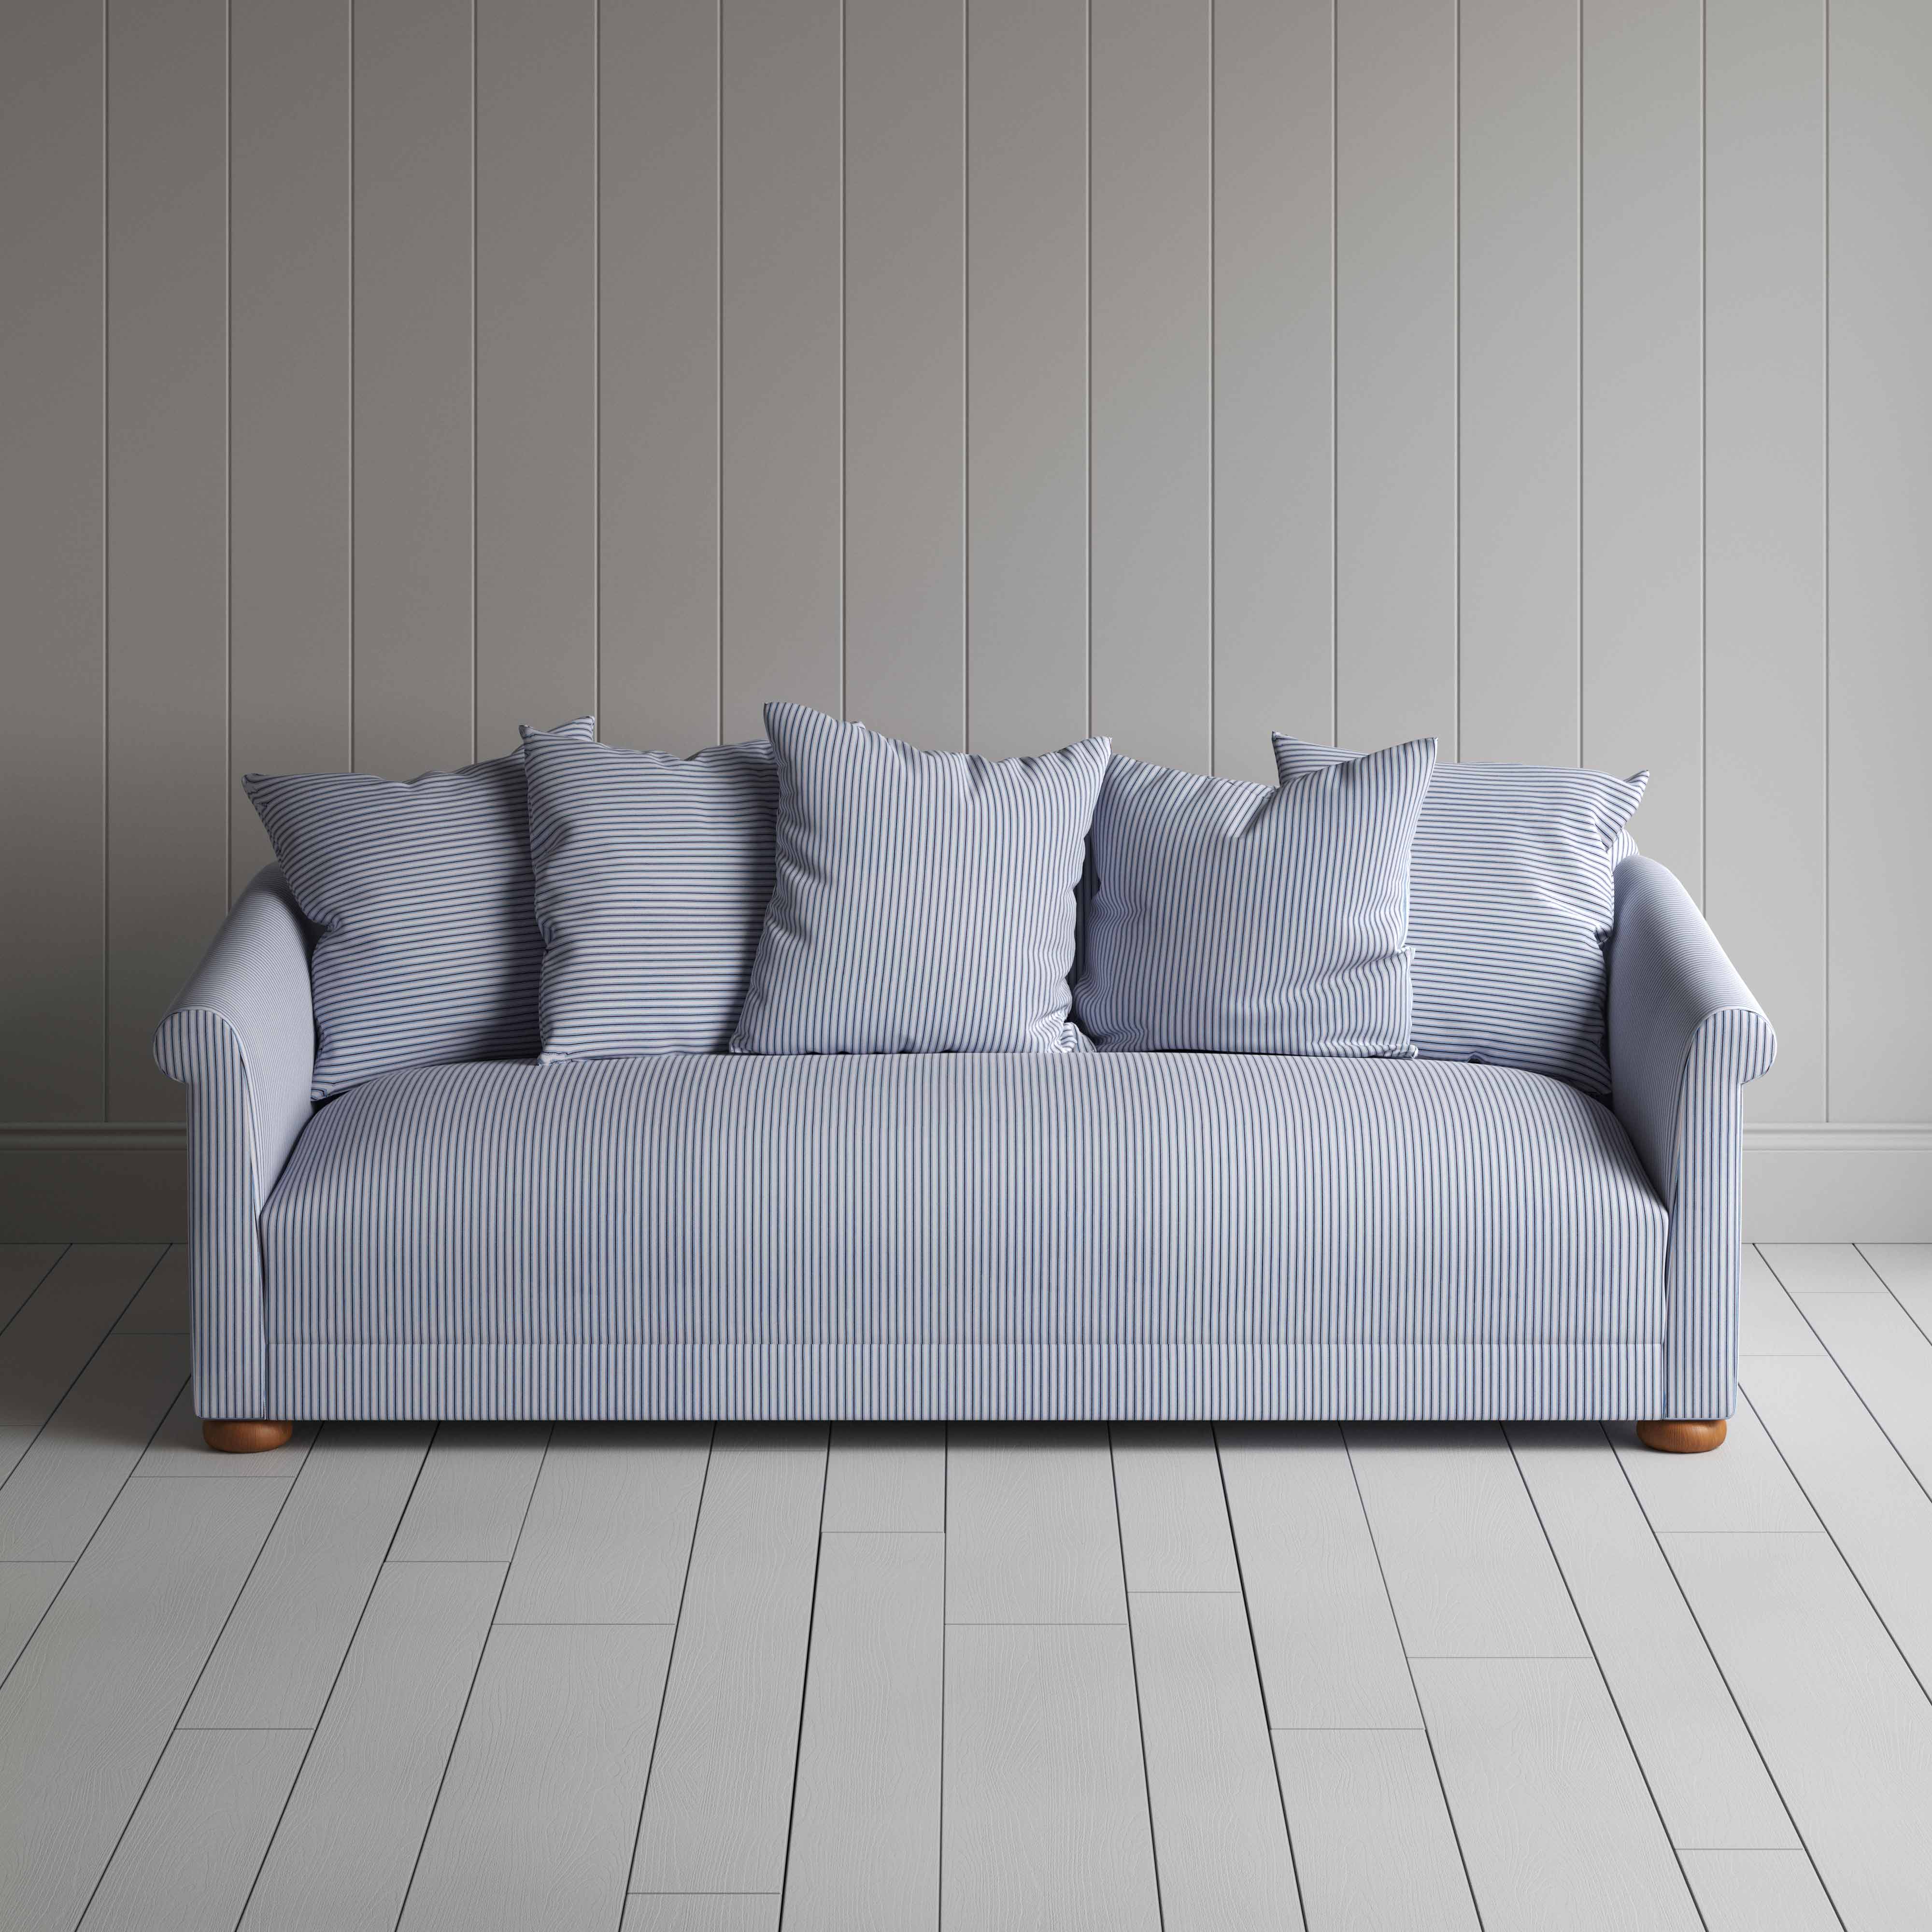  More the Merrier 4 Seater Sofa in Ticking Cotton, Aqua Brown 